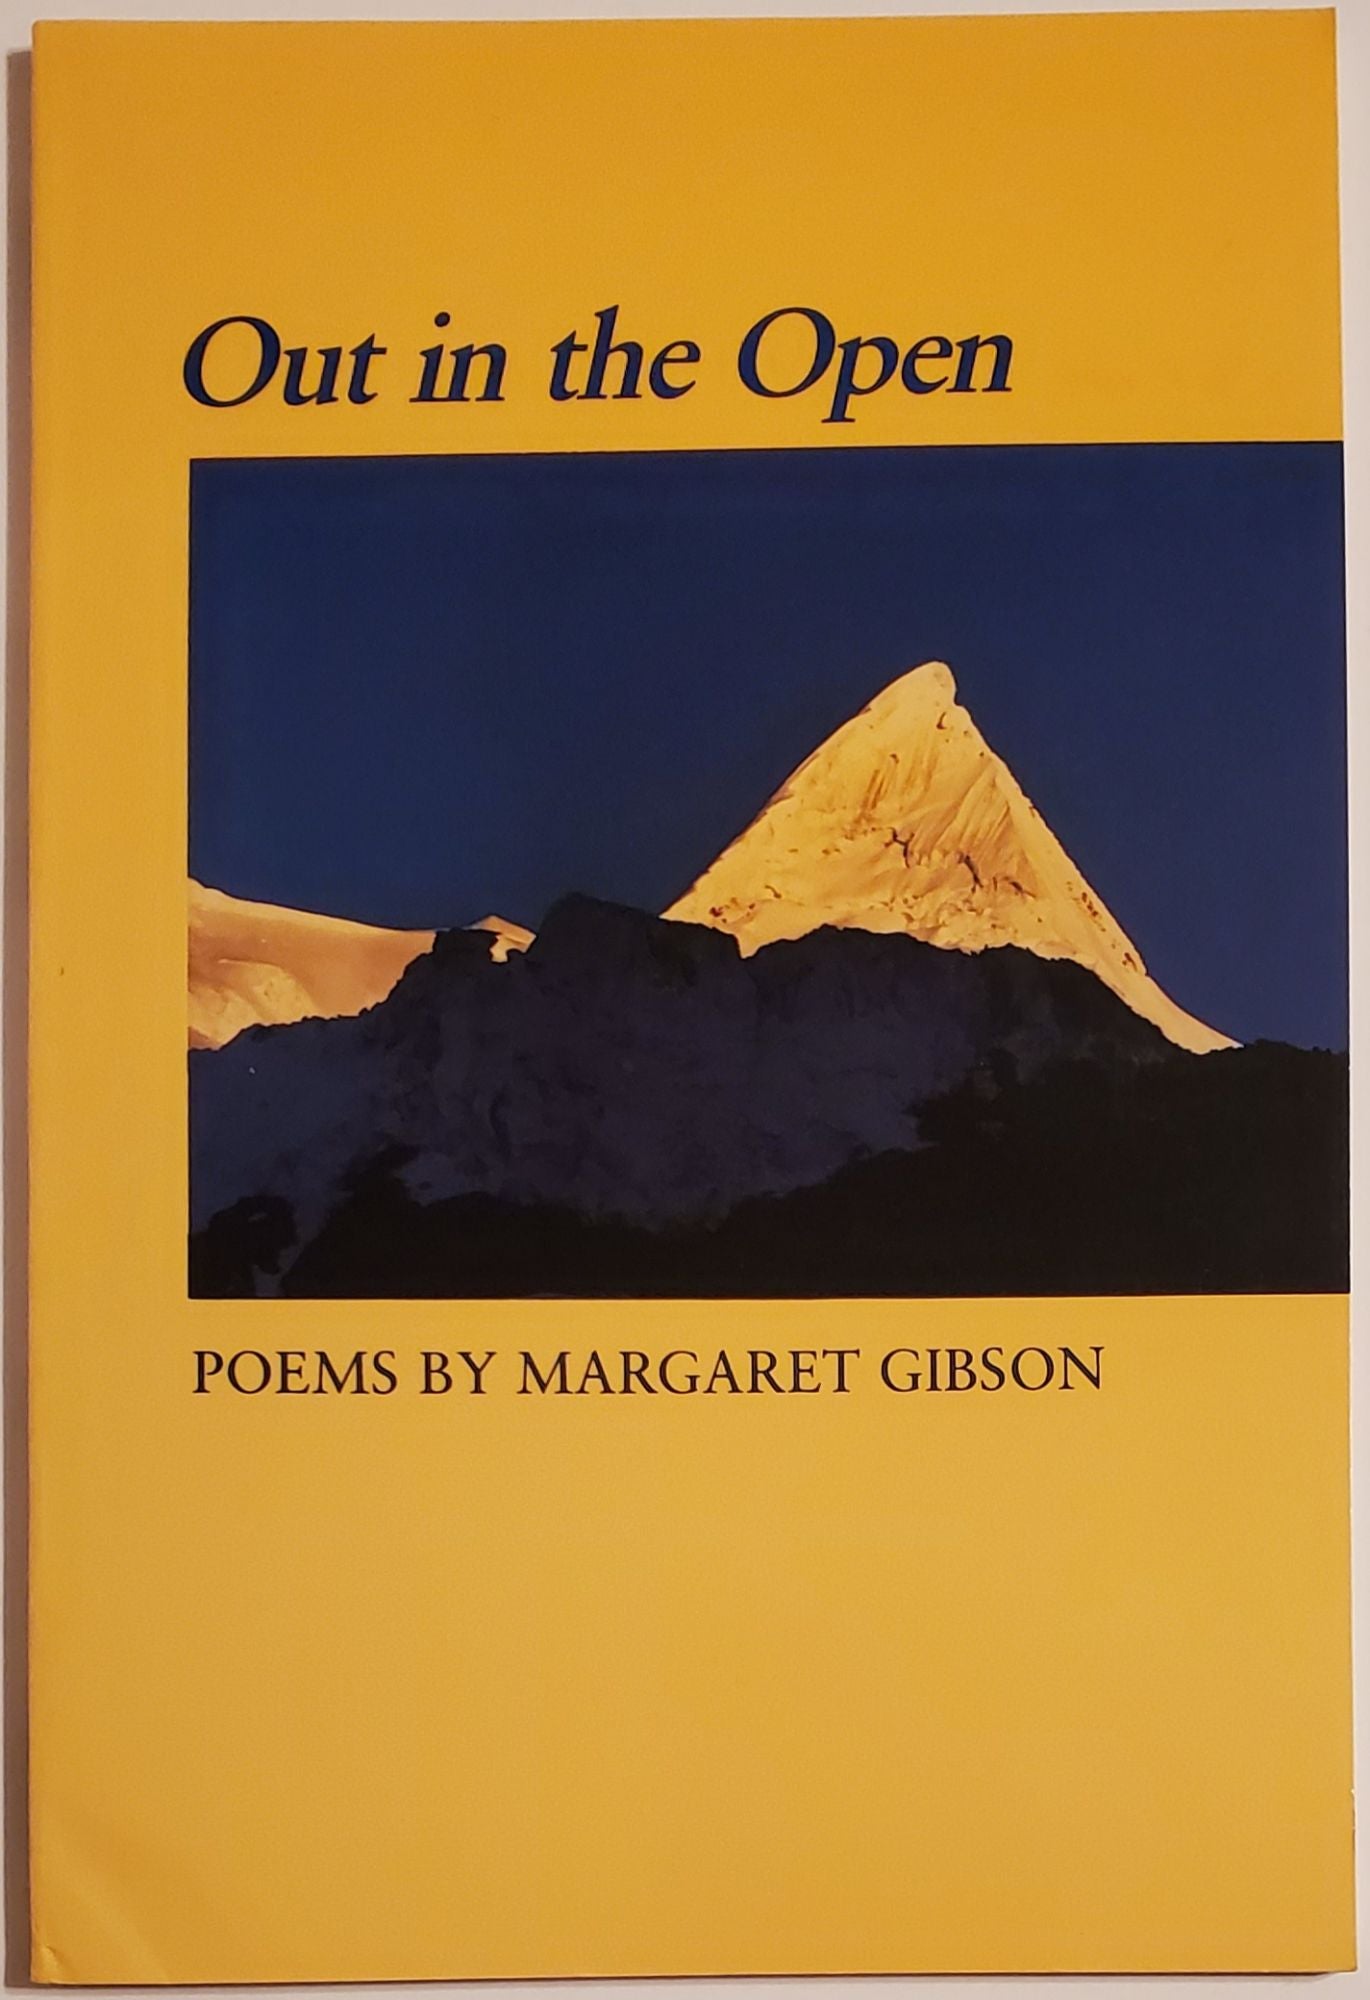 [Book #29248] OUT IN THE OPEN. Margaret Gibson.